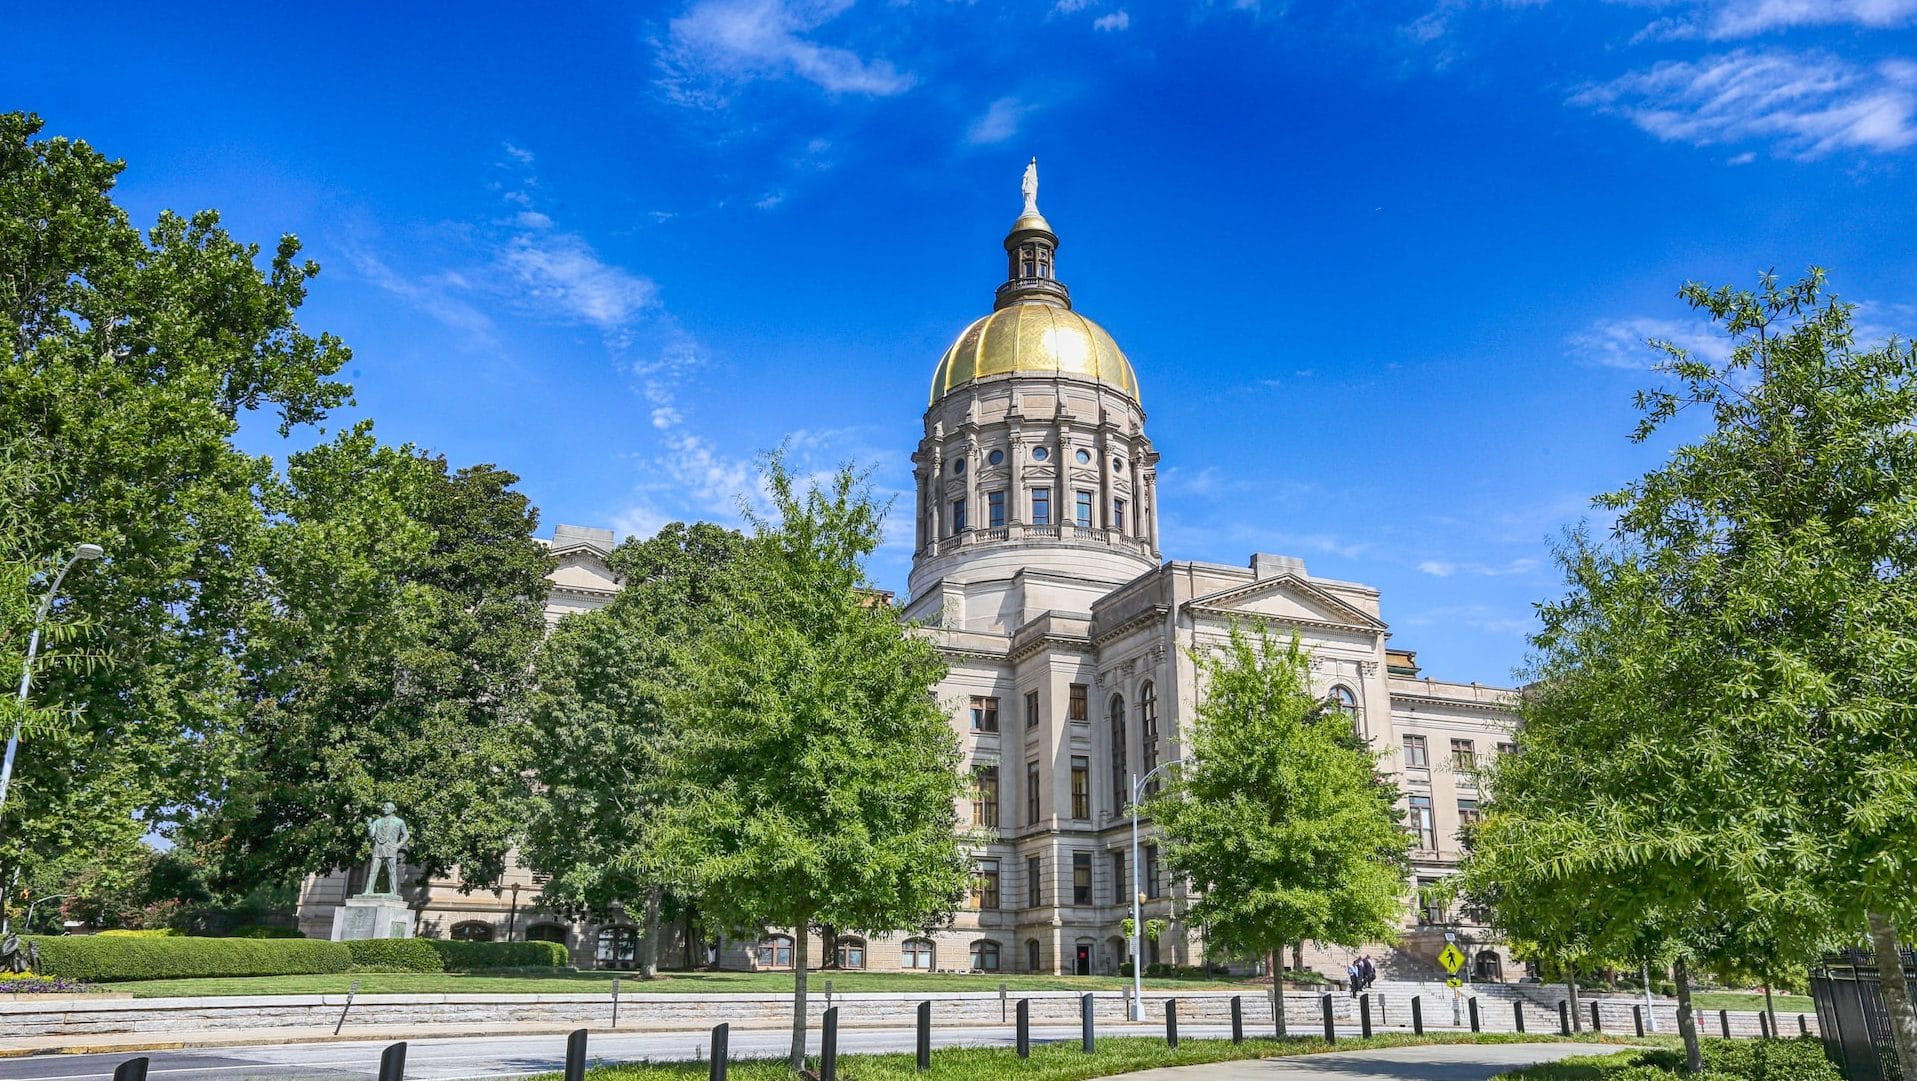 Built in 1889, the Georgia Capitol is home to the state legislature